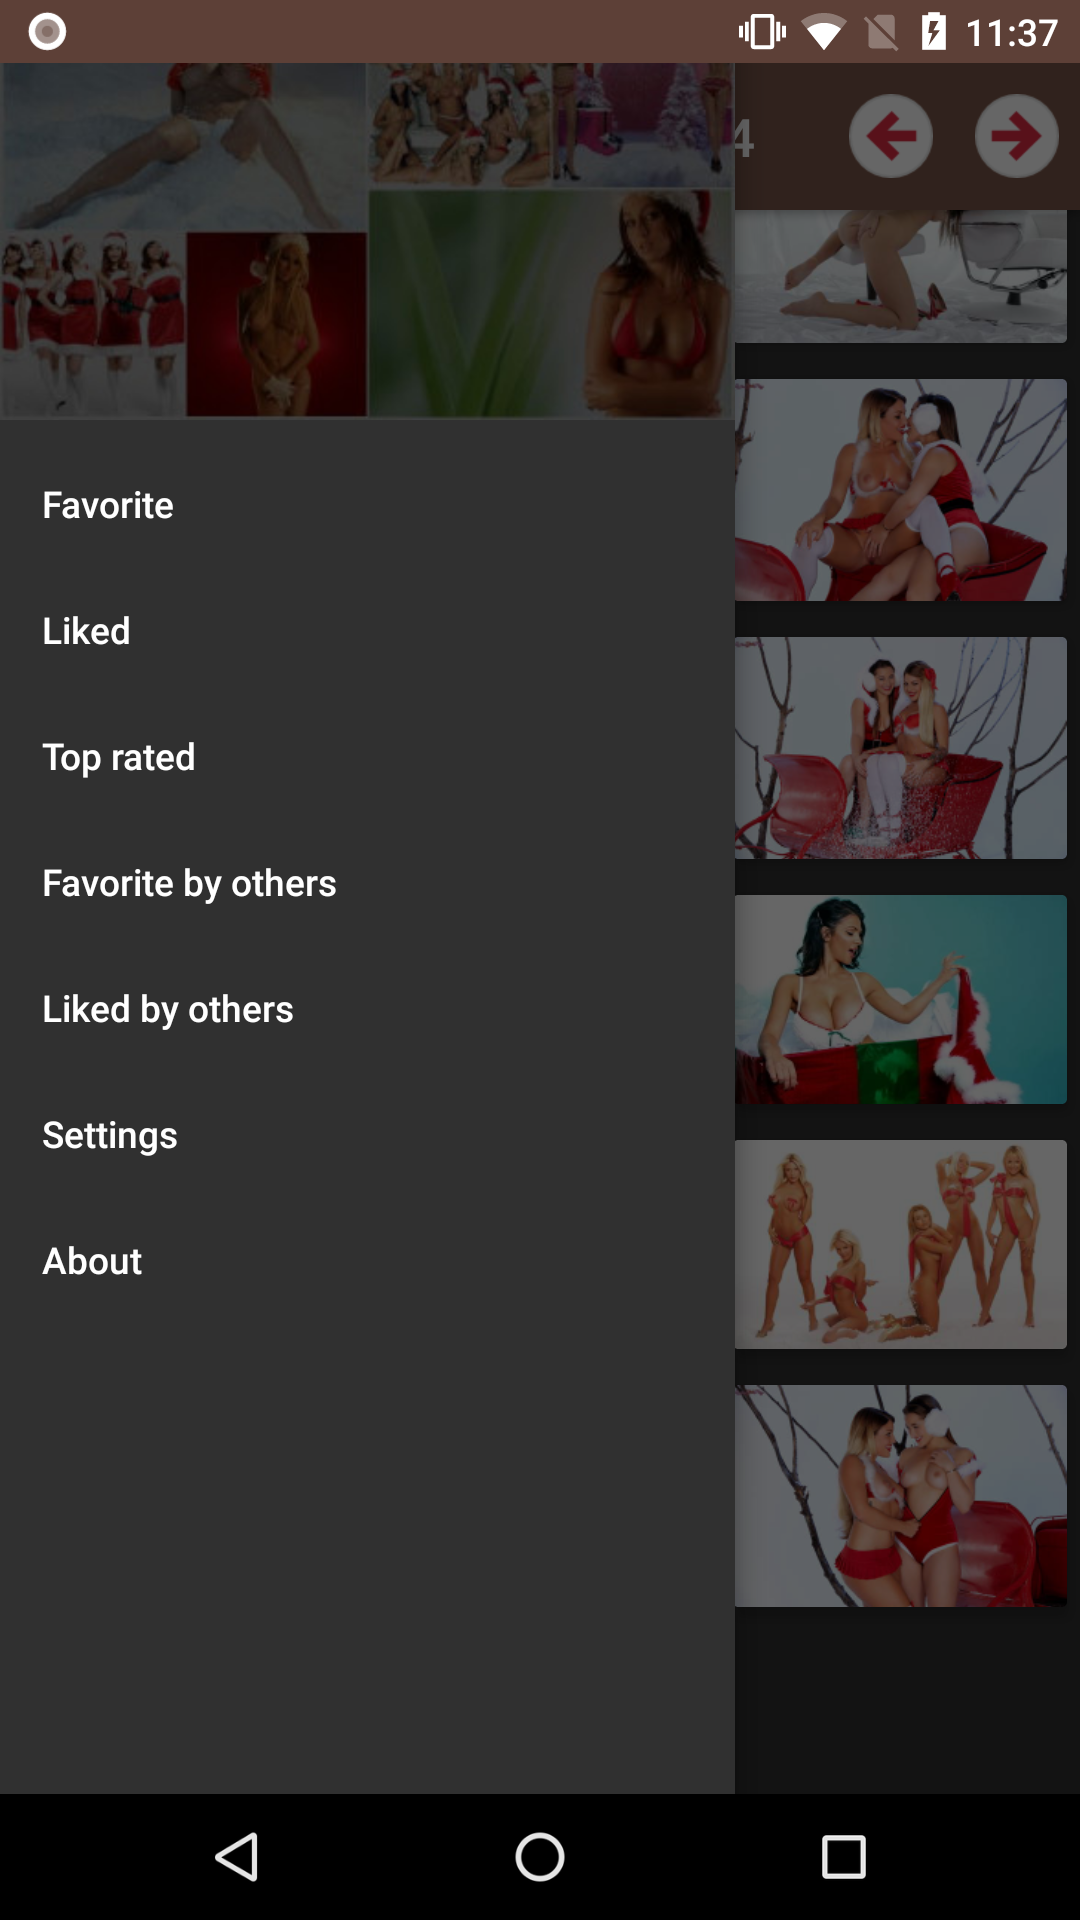 Sexy Christmas Wallpapers 2 holidays,app,picture,erotic,galleries,browser,apk,adult,hentai,andriod,porn,sexy,topless,mature,android,wallpapers,harem,backgrounds,top,comix,futanari,wallpaper,femboy,rated,apps